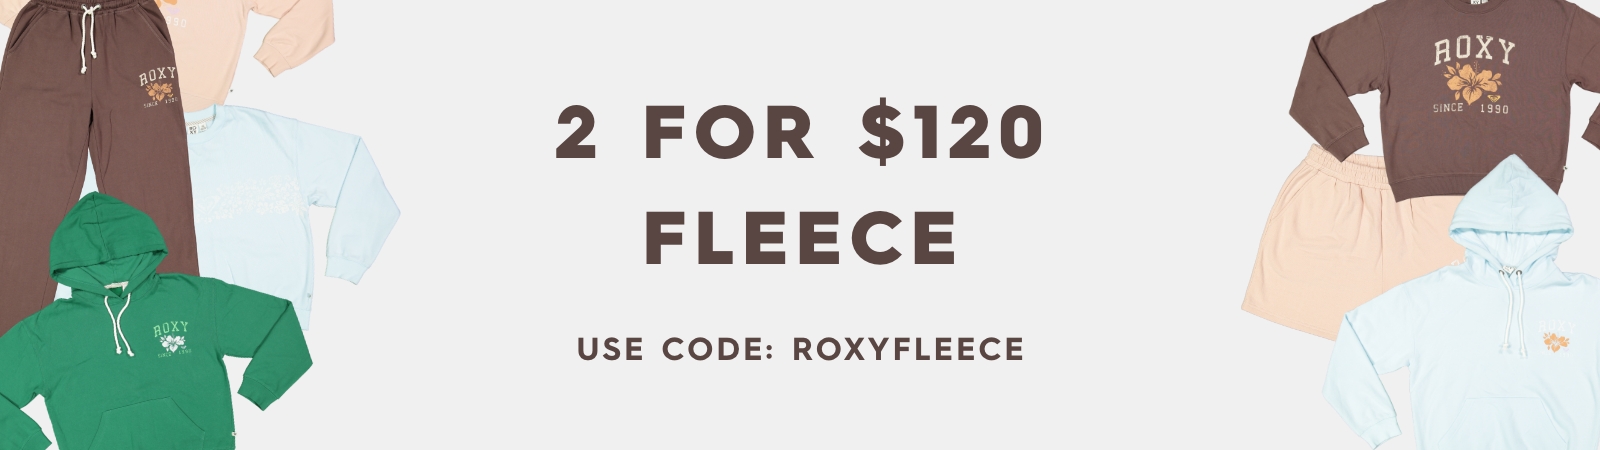 Roxy - Get 2 for $120 fleece with coupon